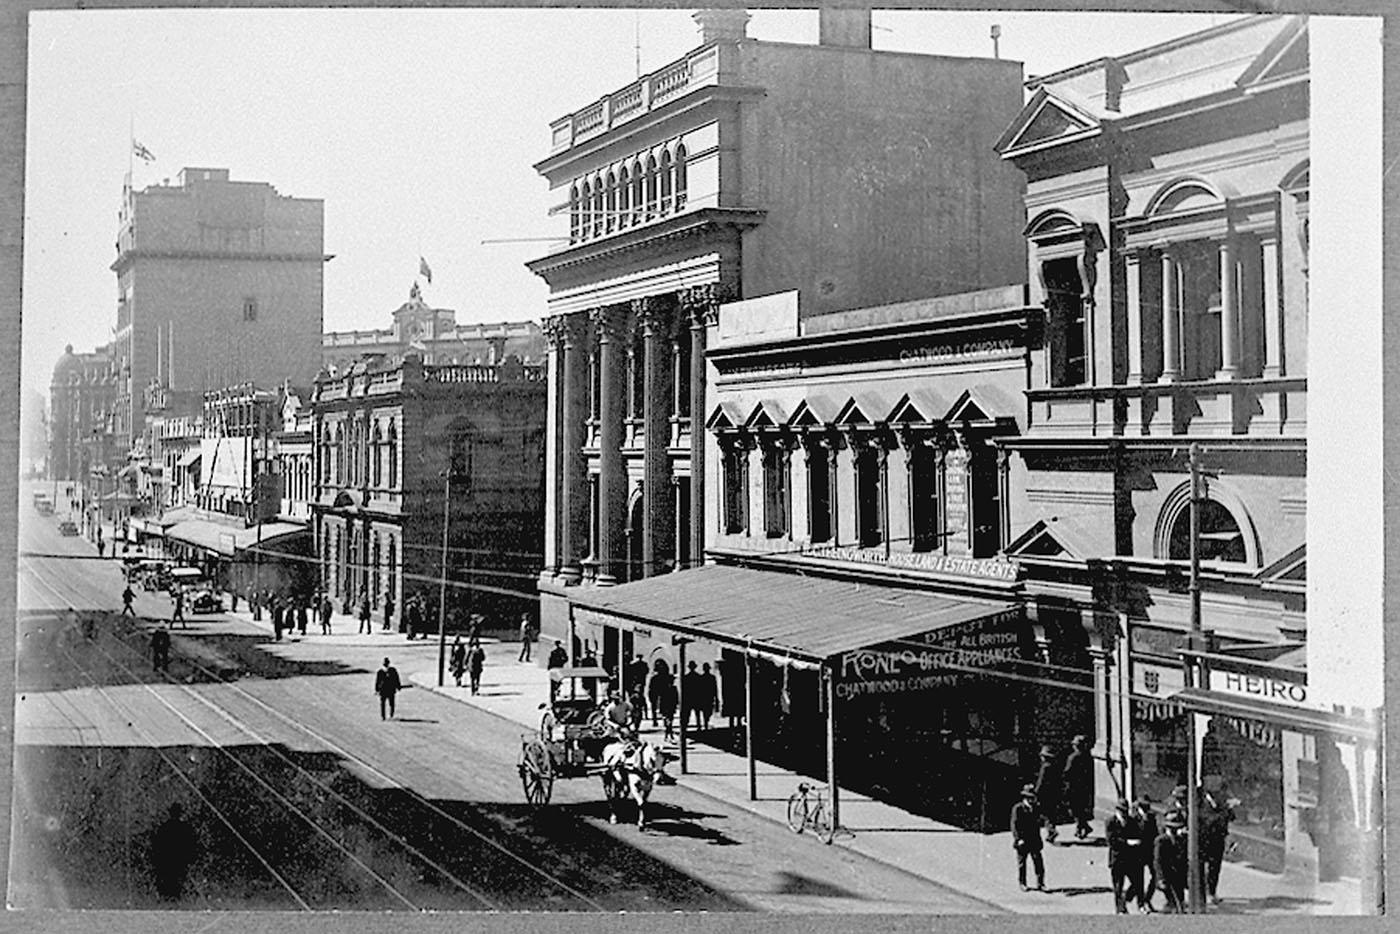 View of Queen Street in the 1920s Brisbane showing building facades